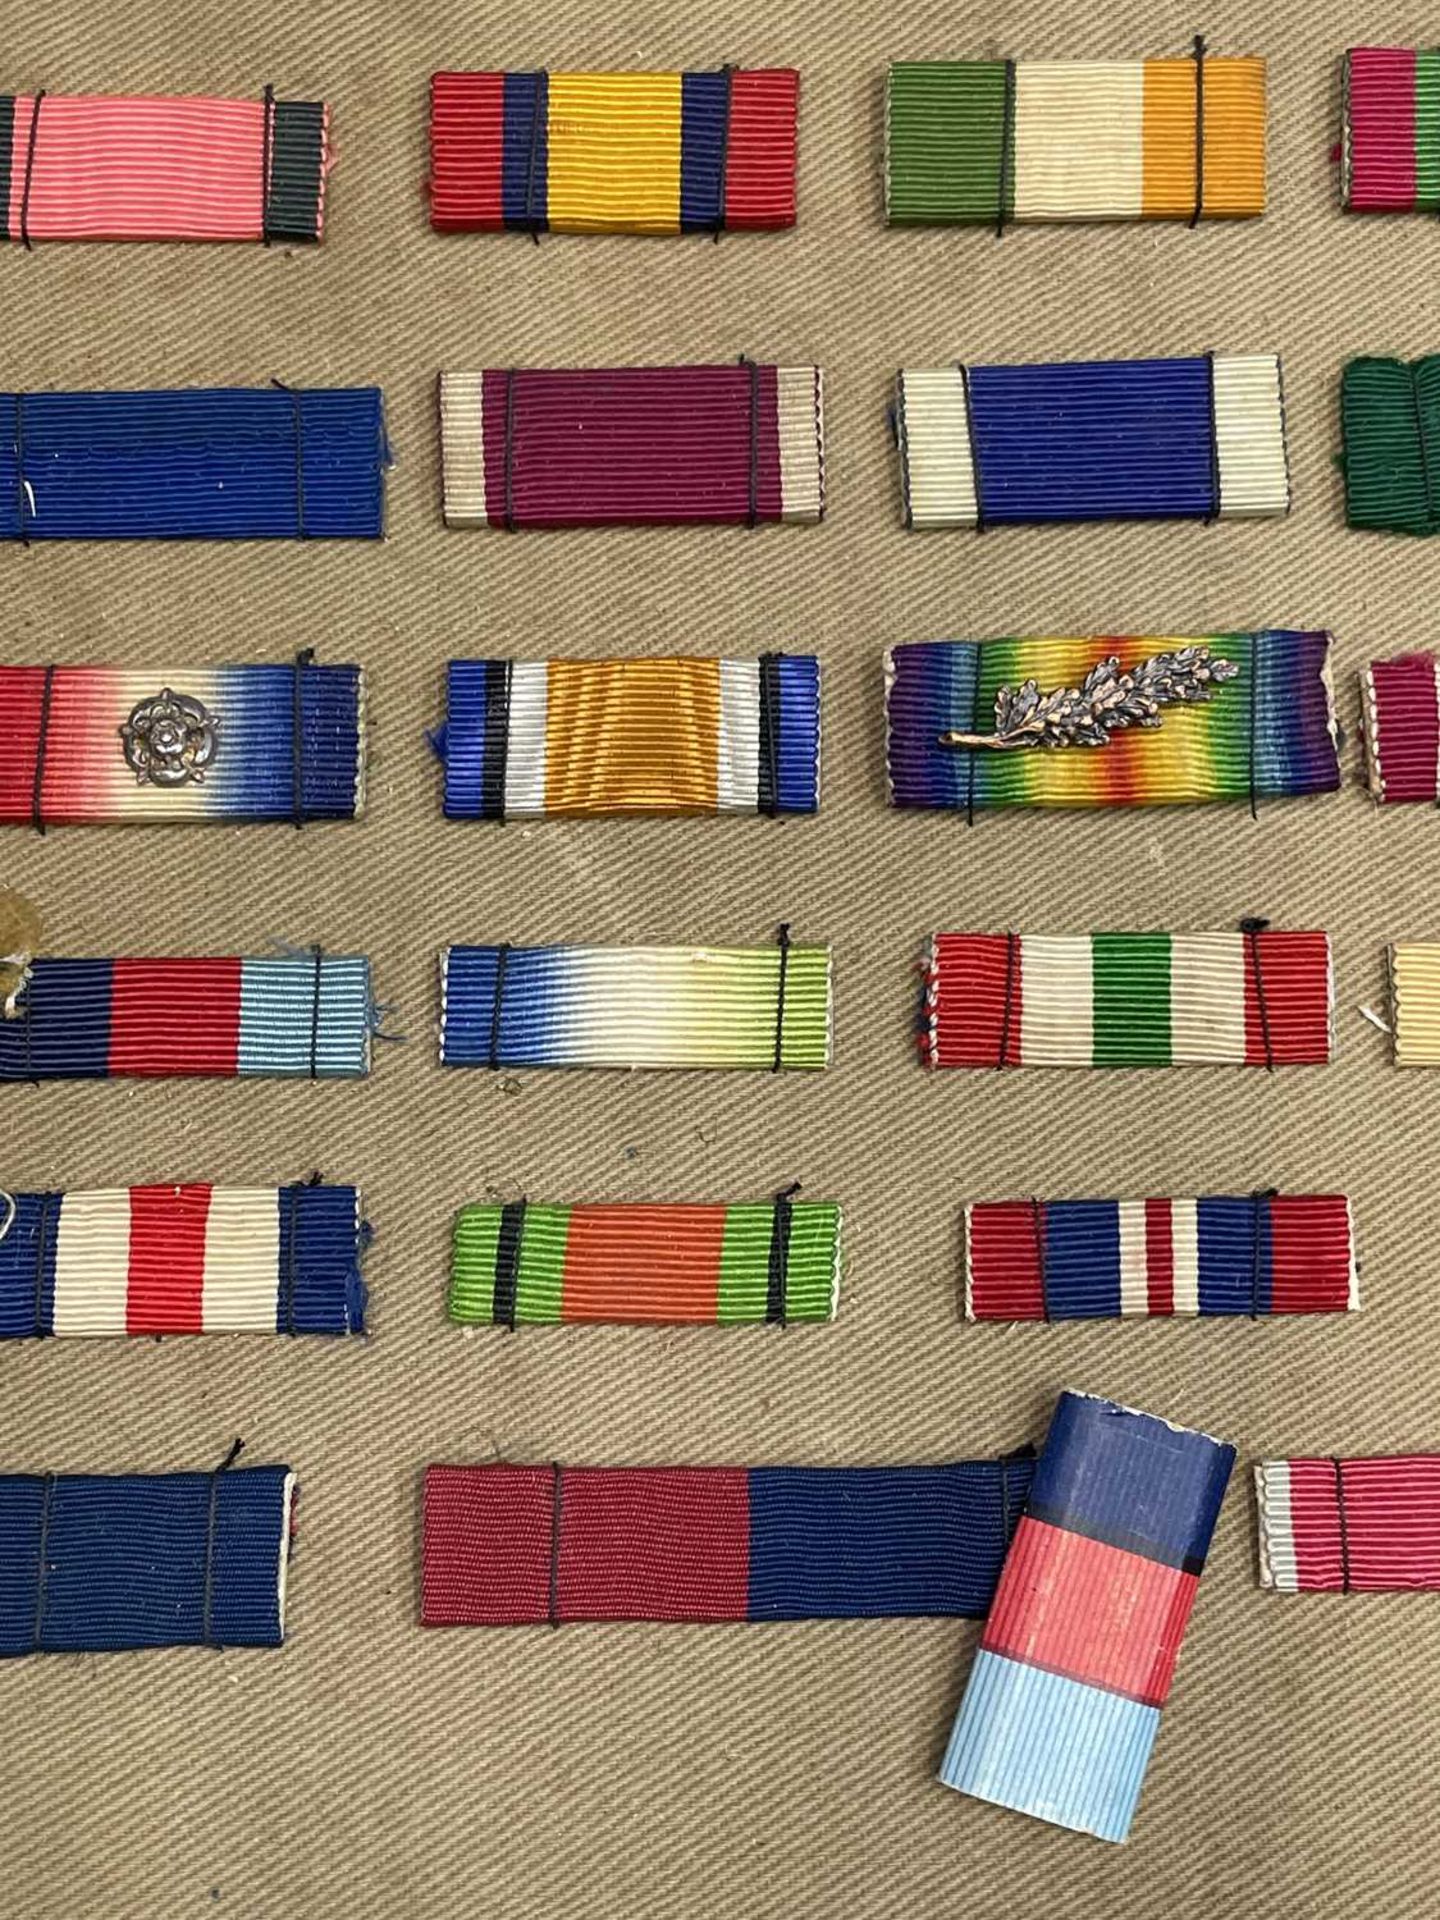 World War One Medals and Miscellaneous Military Items. Lot includes a 1914 Mons Star and Bar to - Image 6 of 13